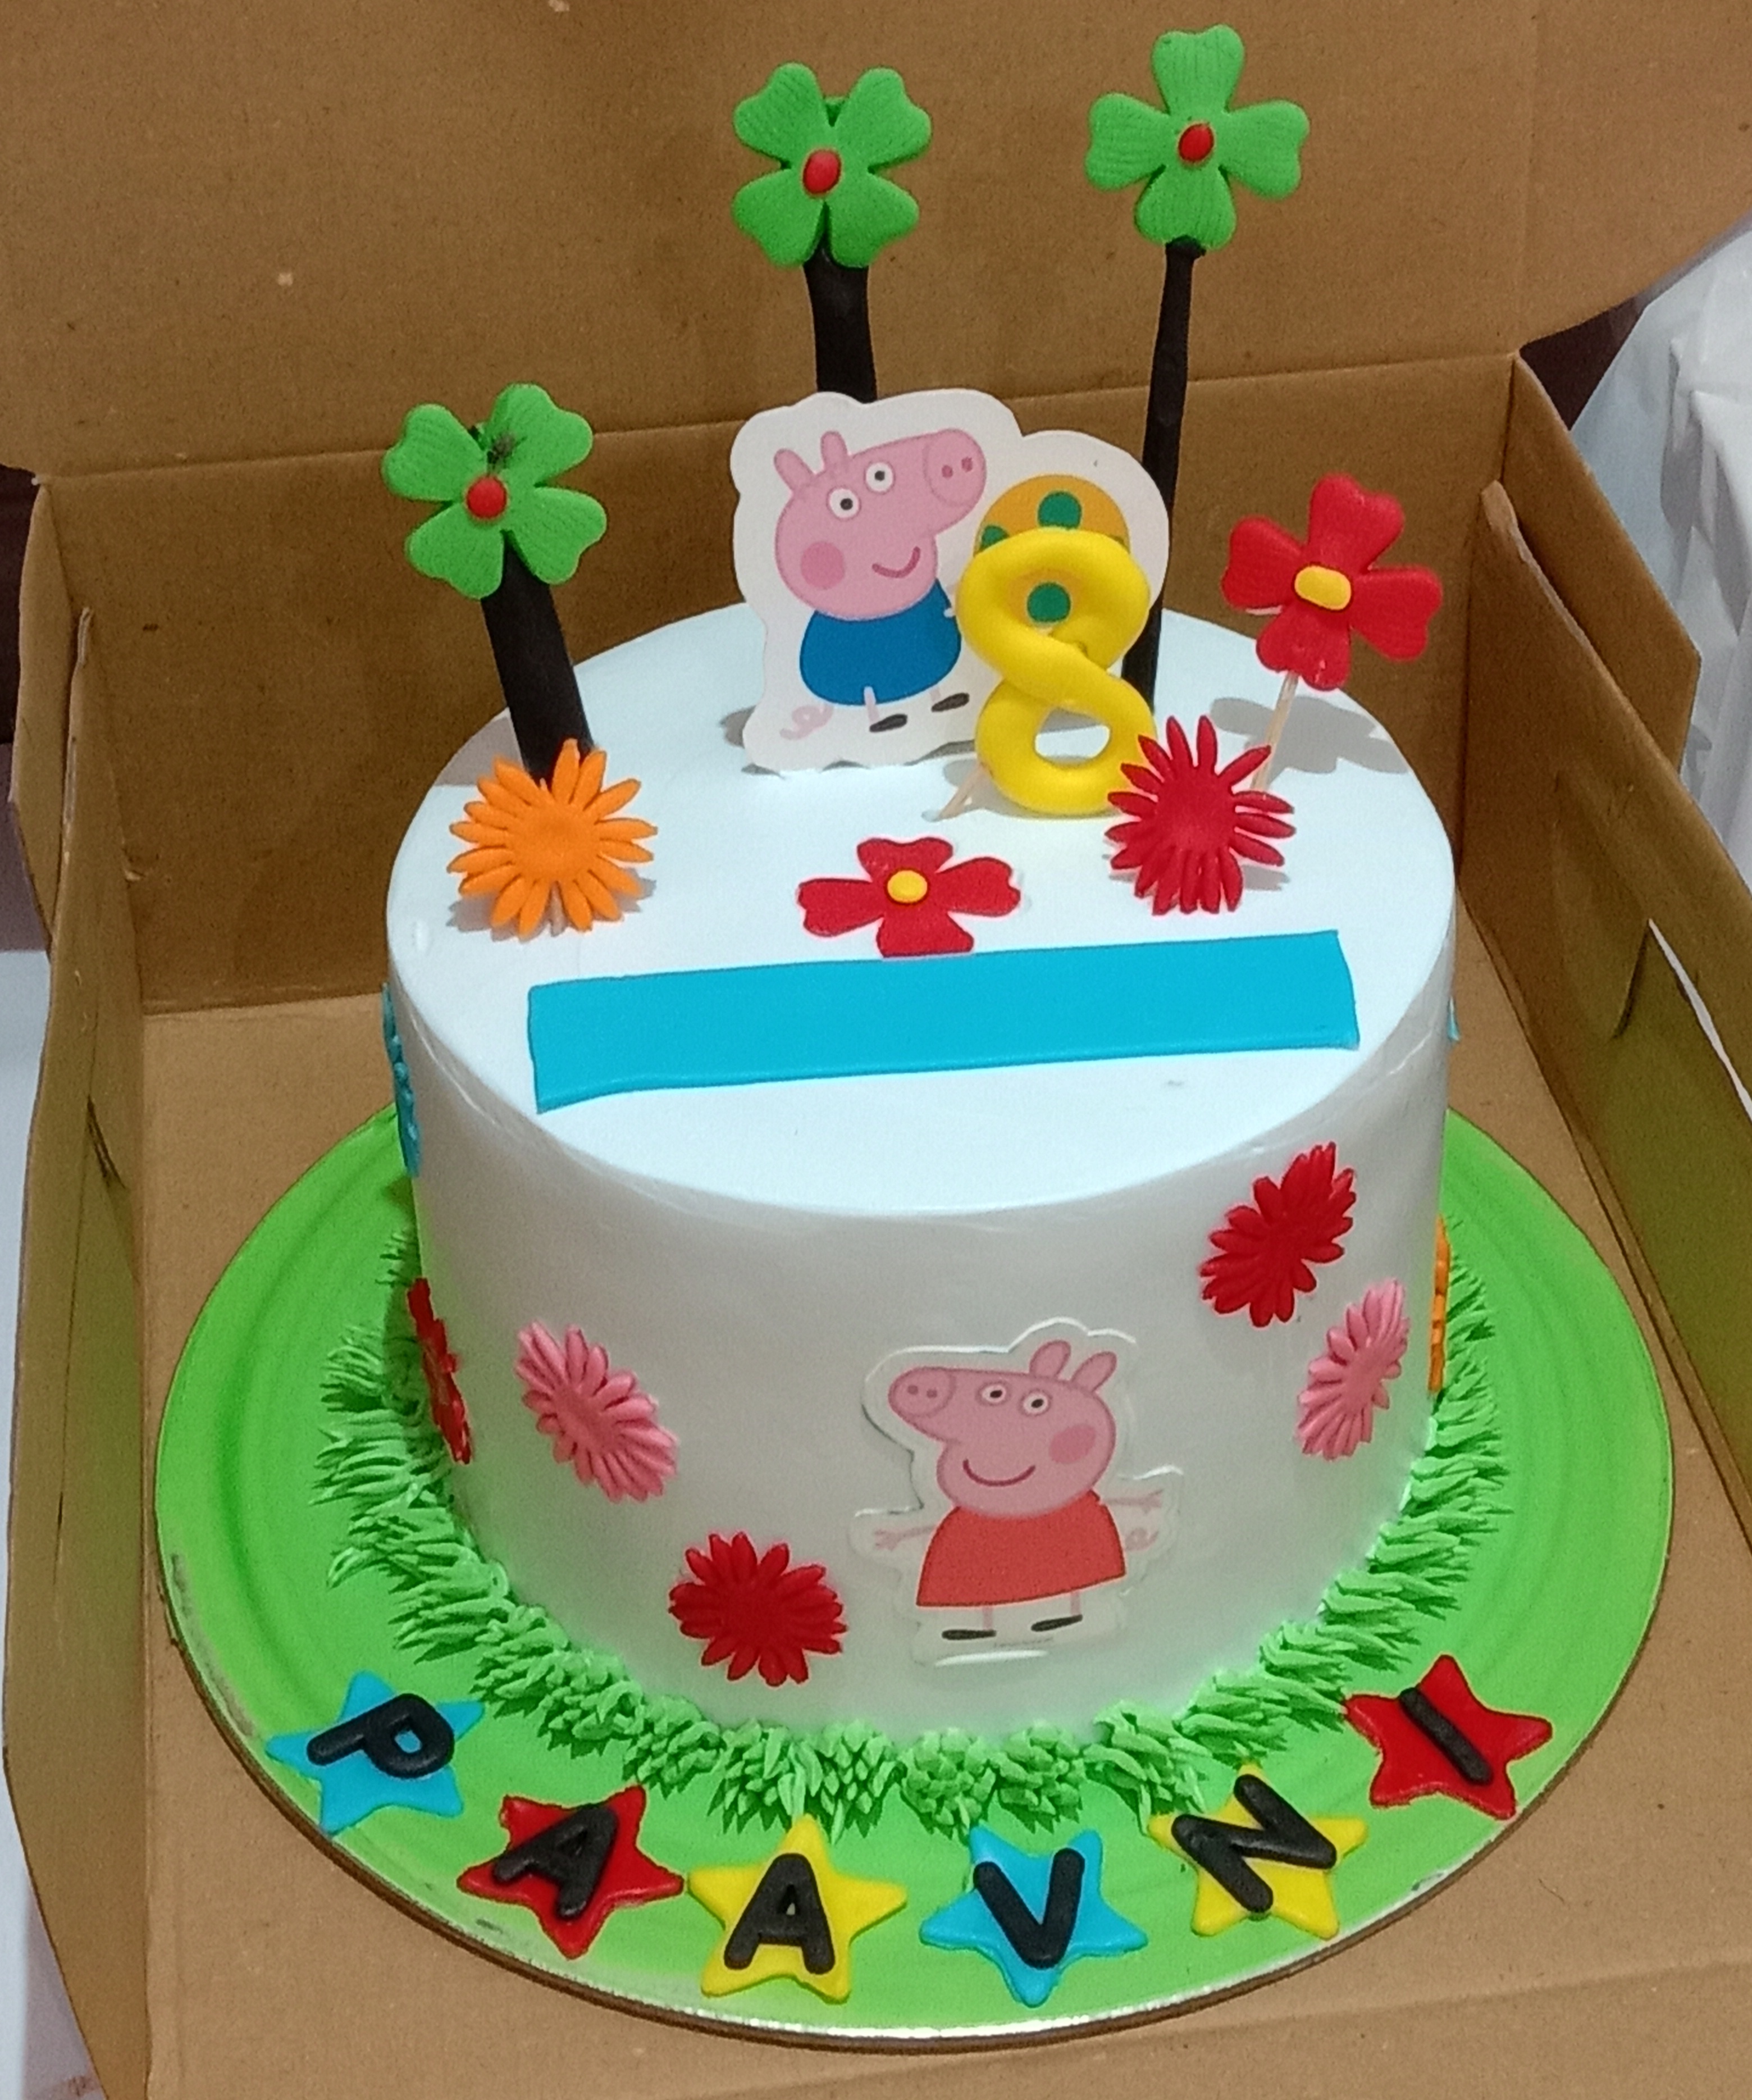 Peppa Pig Cream Cake Delivery in Delhi NCR - ₹2, Cake Express